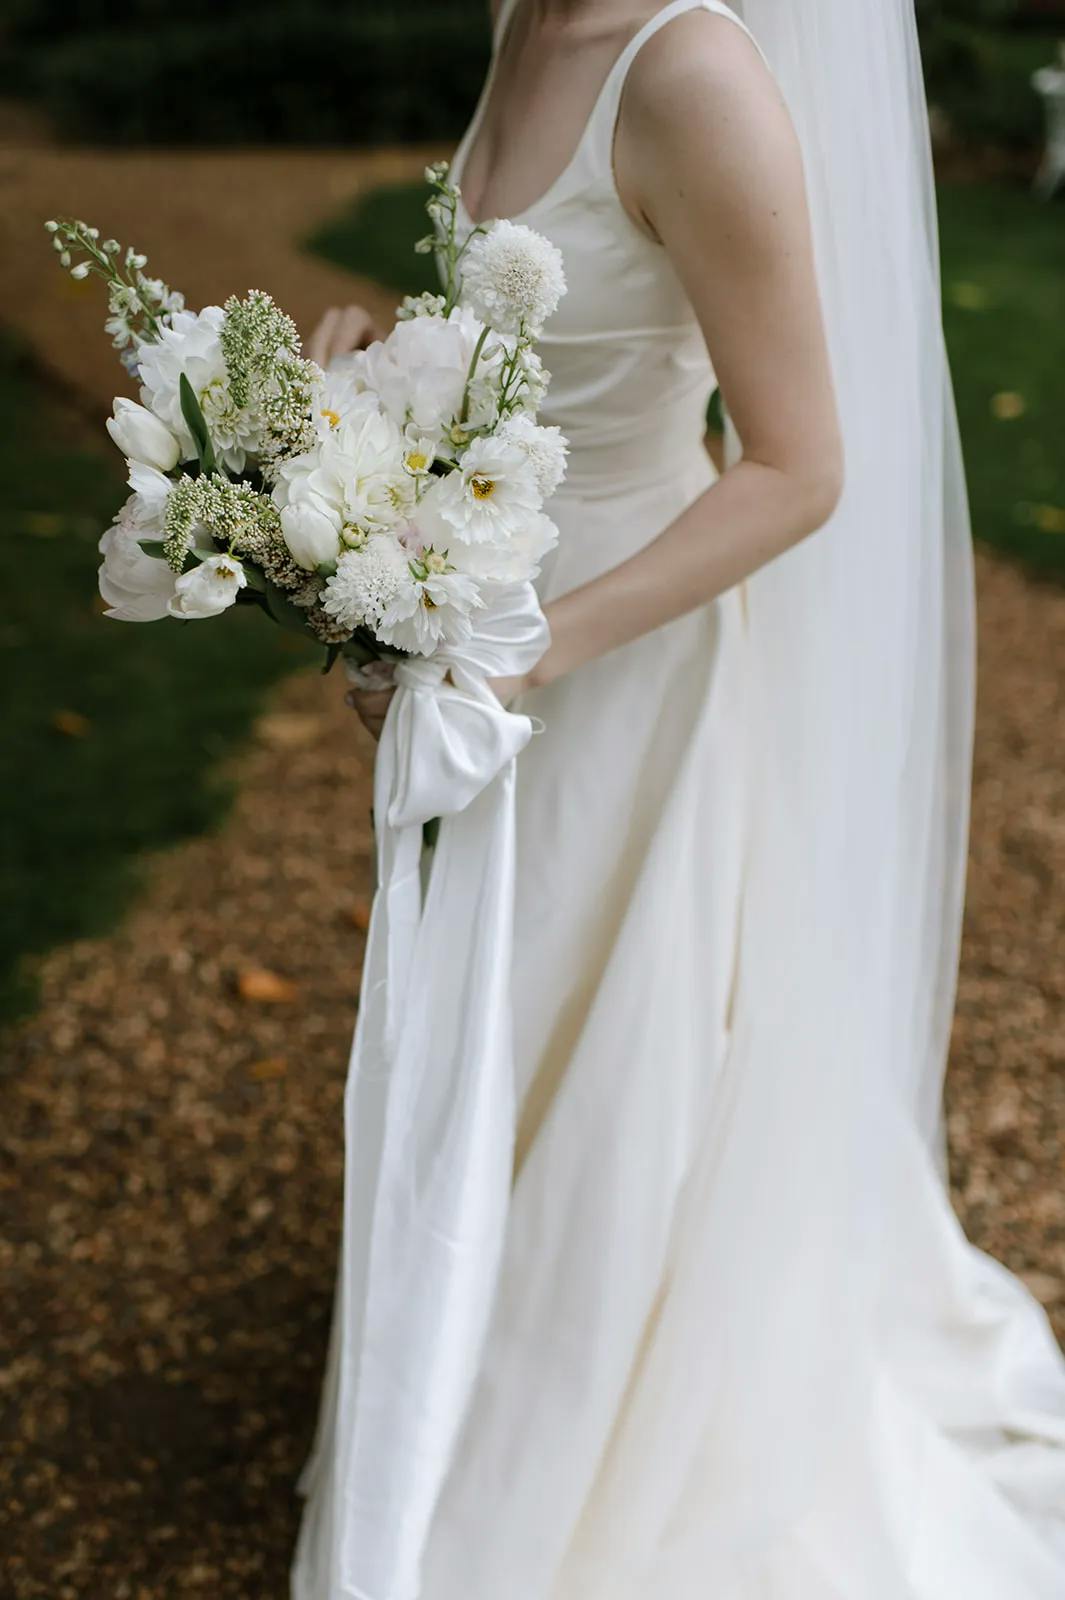 A bride in a sleeveless white wedding dress holds a bouquet of white flowers, including tulips, chrysanthemums, and greenery, wrapped with a white ribbon. The bride's long veil flows down her back, and the background features a garden path.